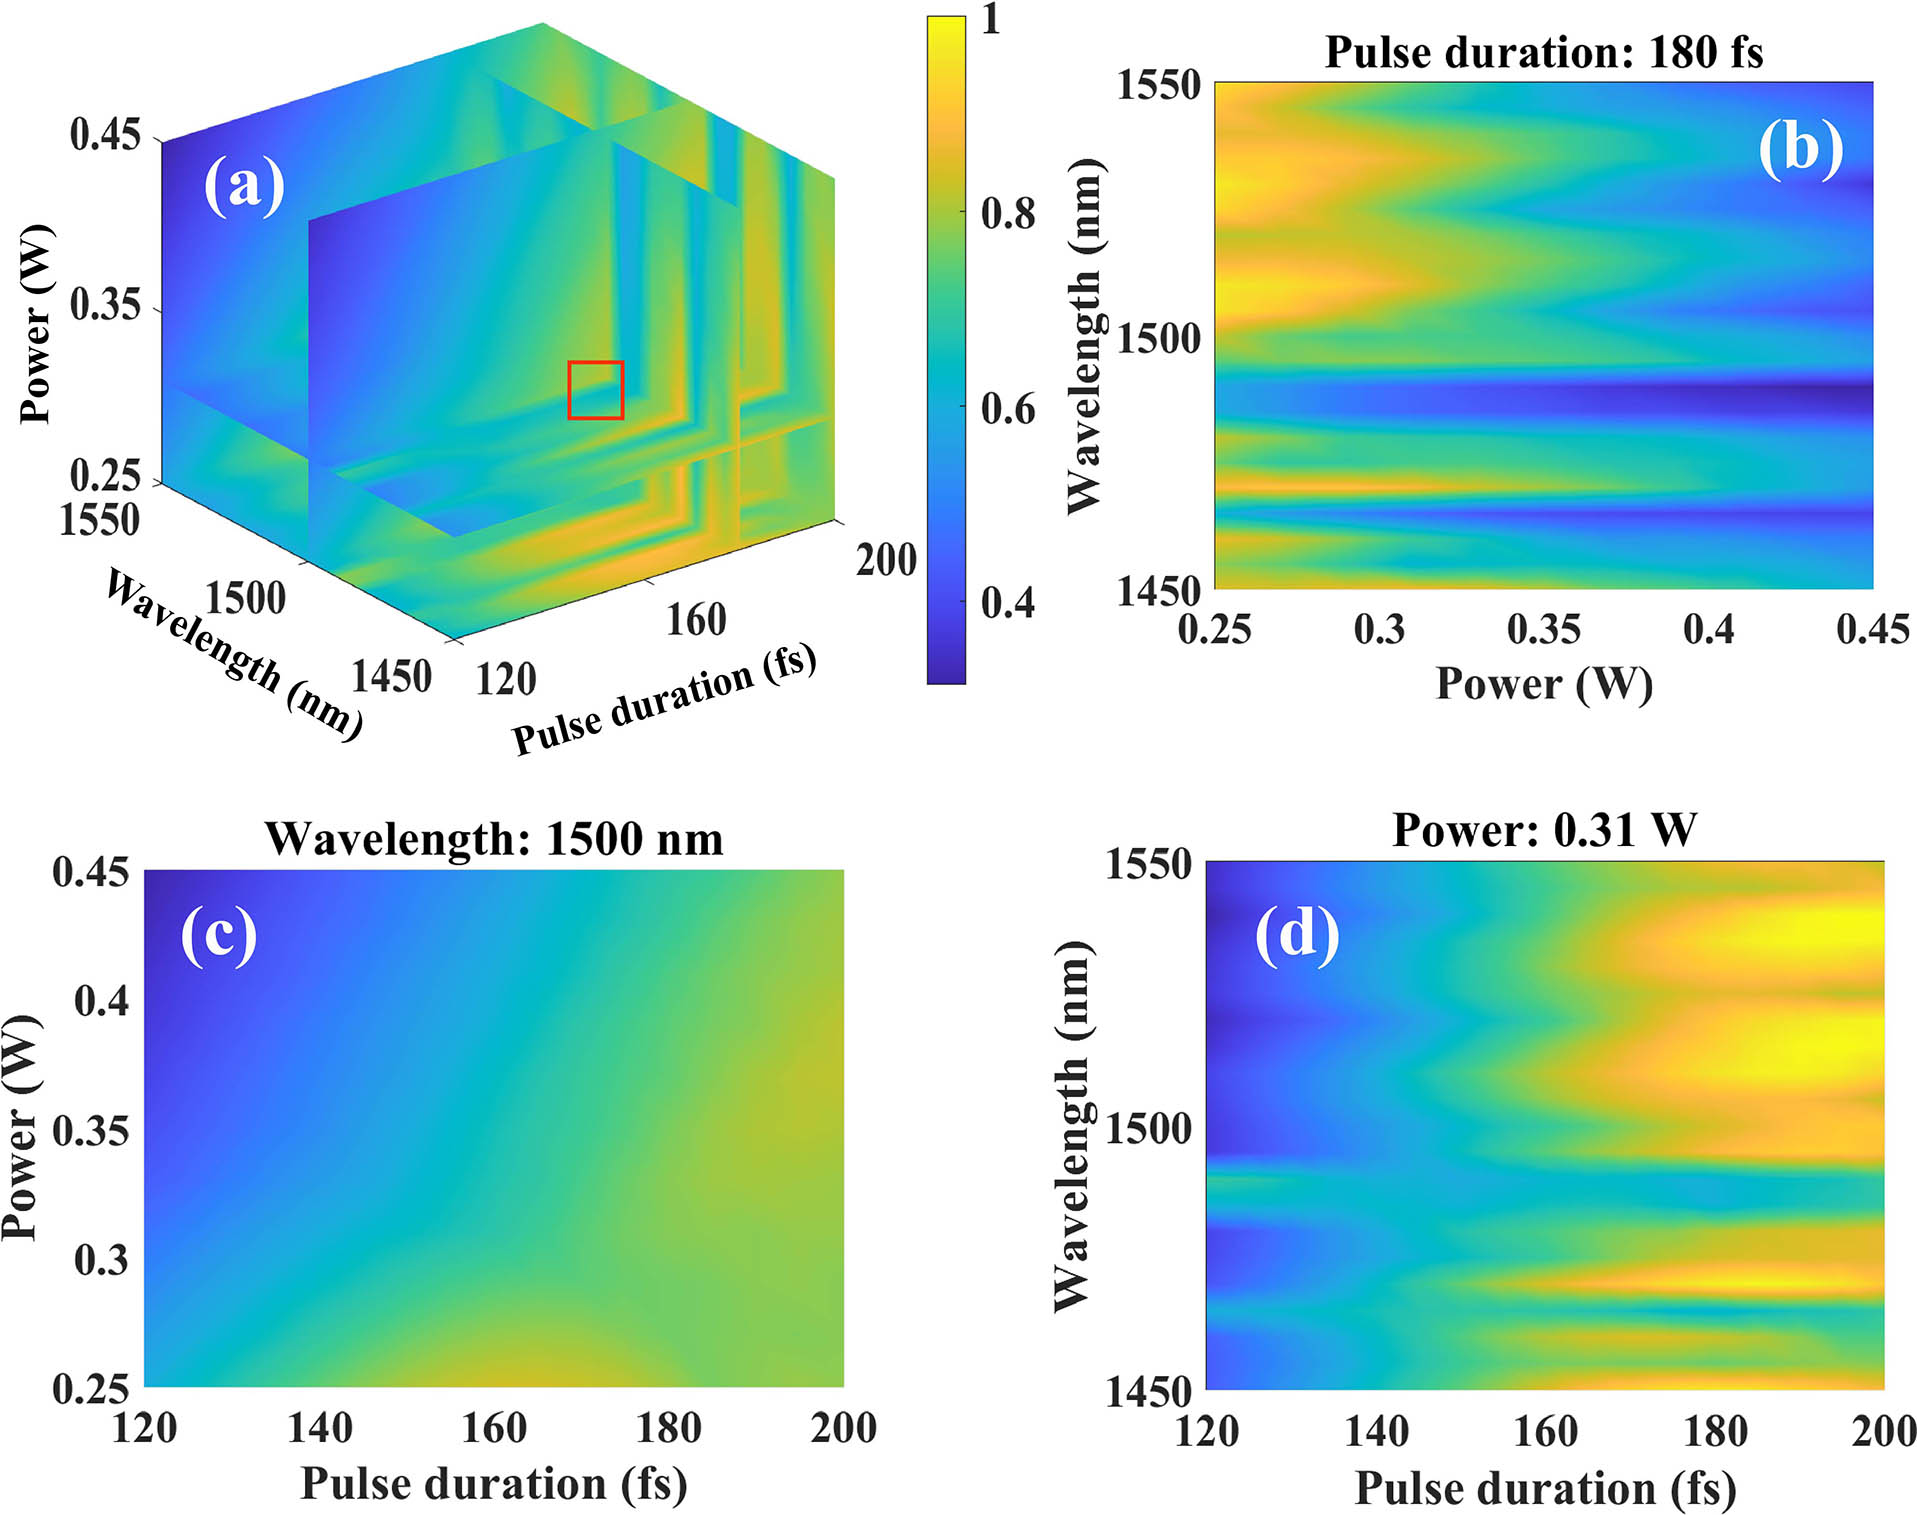 (a) Simulation of SR for different wavelengths, pulse durations, and powers. (b)–(d) Slice diagrams of (a) with pulse duration of 180 fs, central wavelength of 1500 nm, and power of 0.31 W, respectively. The color bar represents the SR.